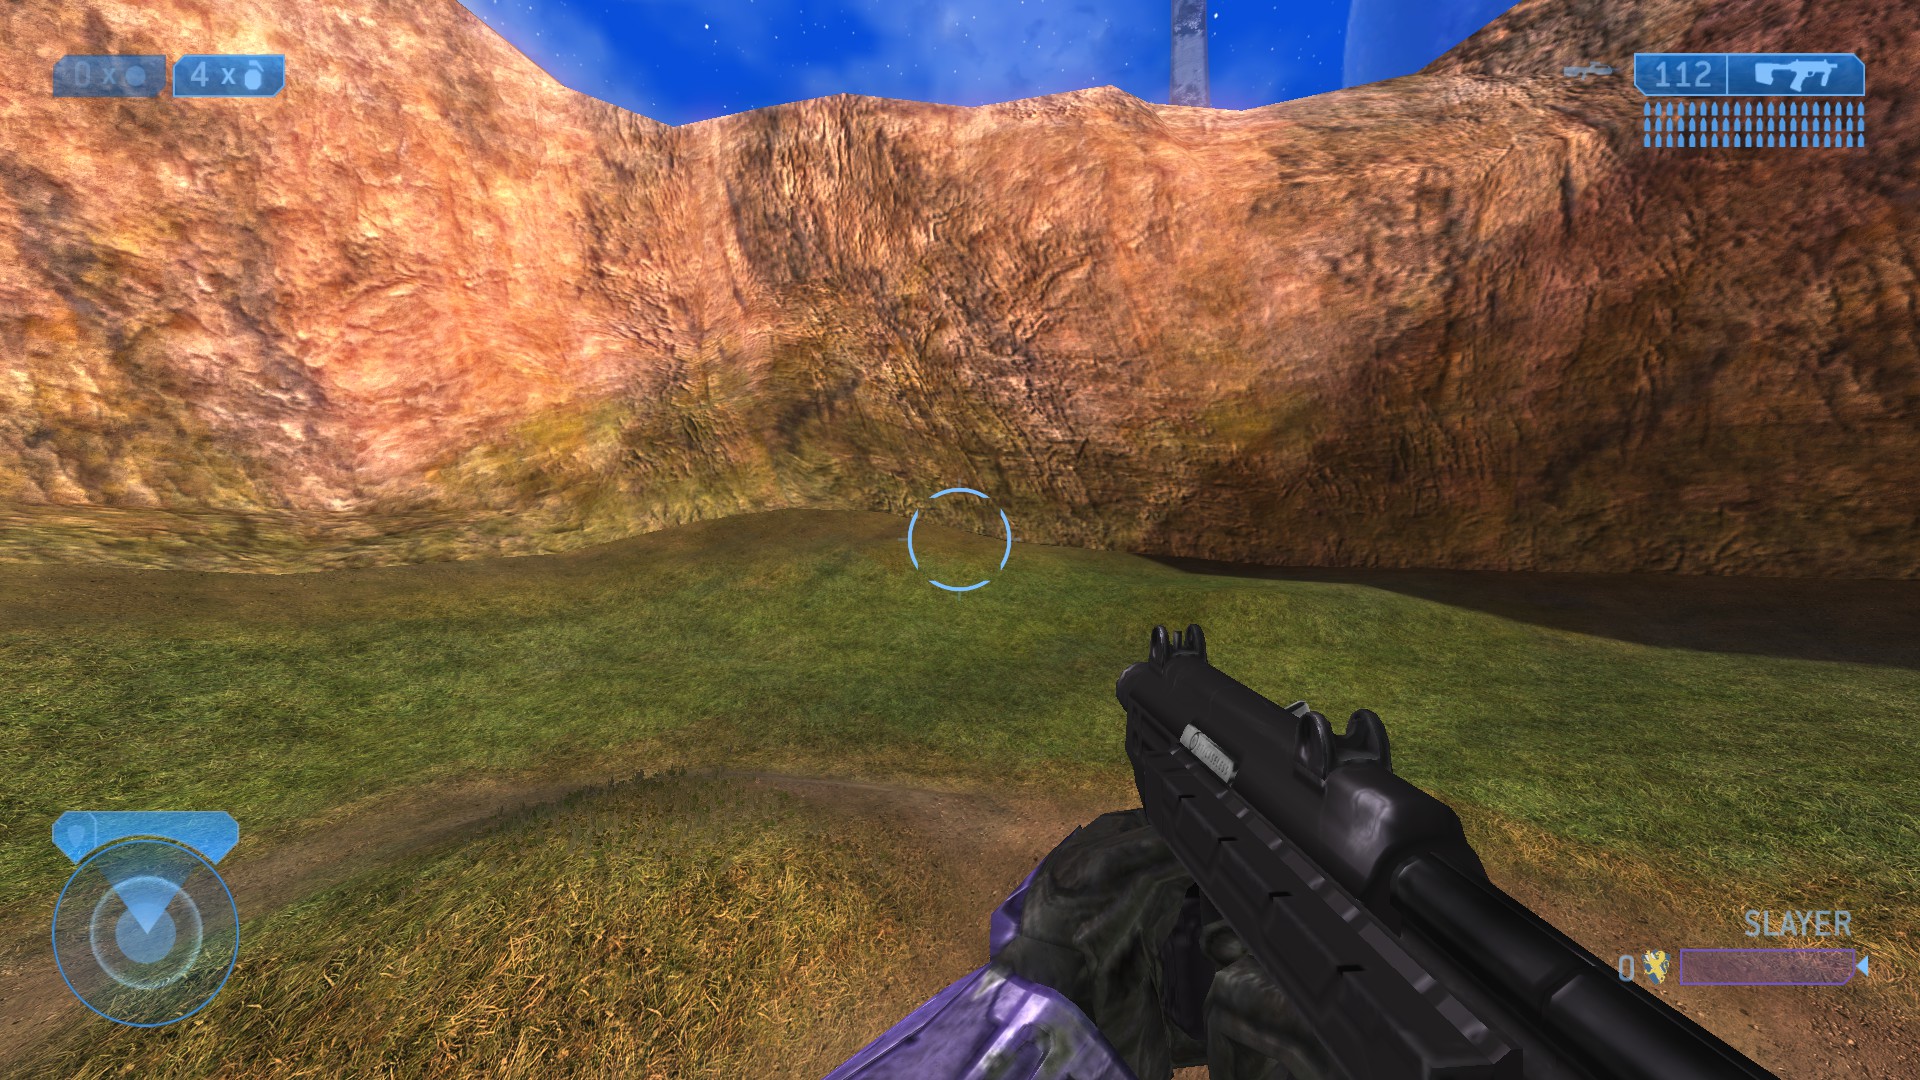 Halo: The Master Chief Collection How to Viewmodels in game guide - Halo 2 / Anniversary - 566415B